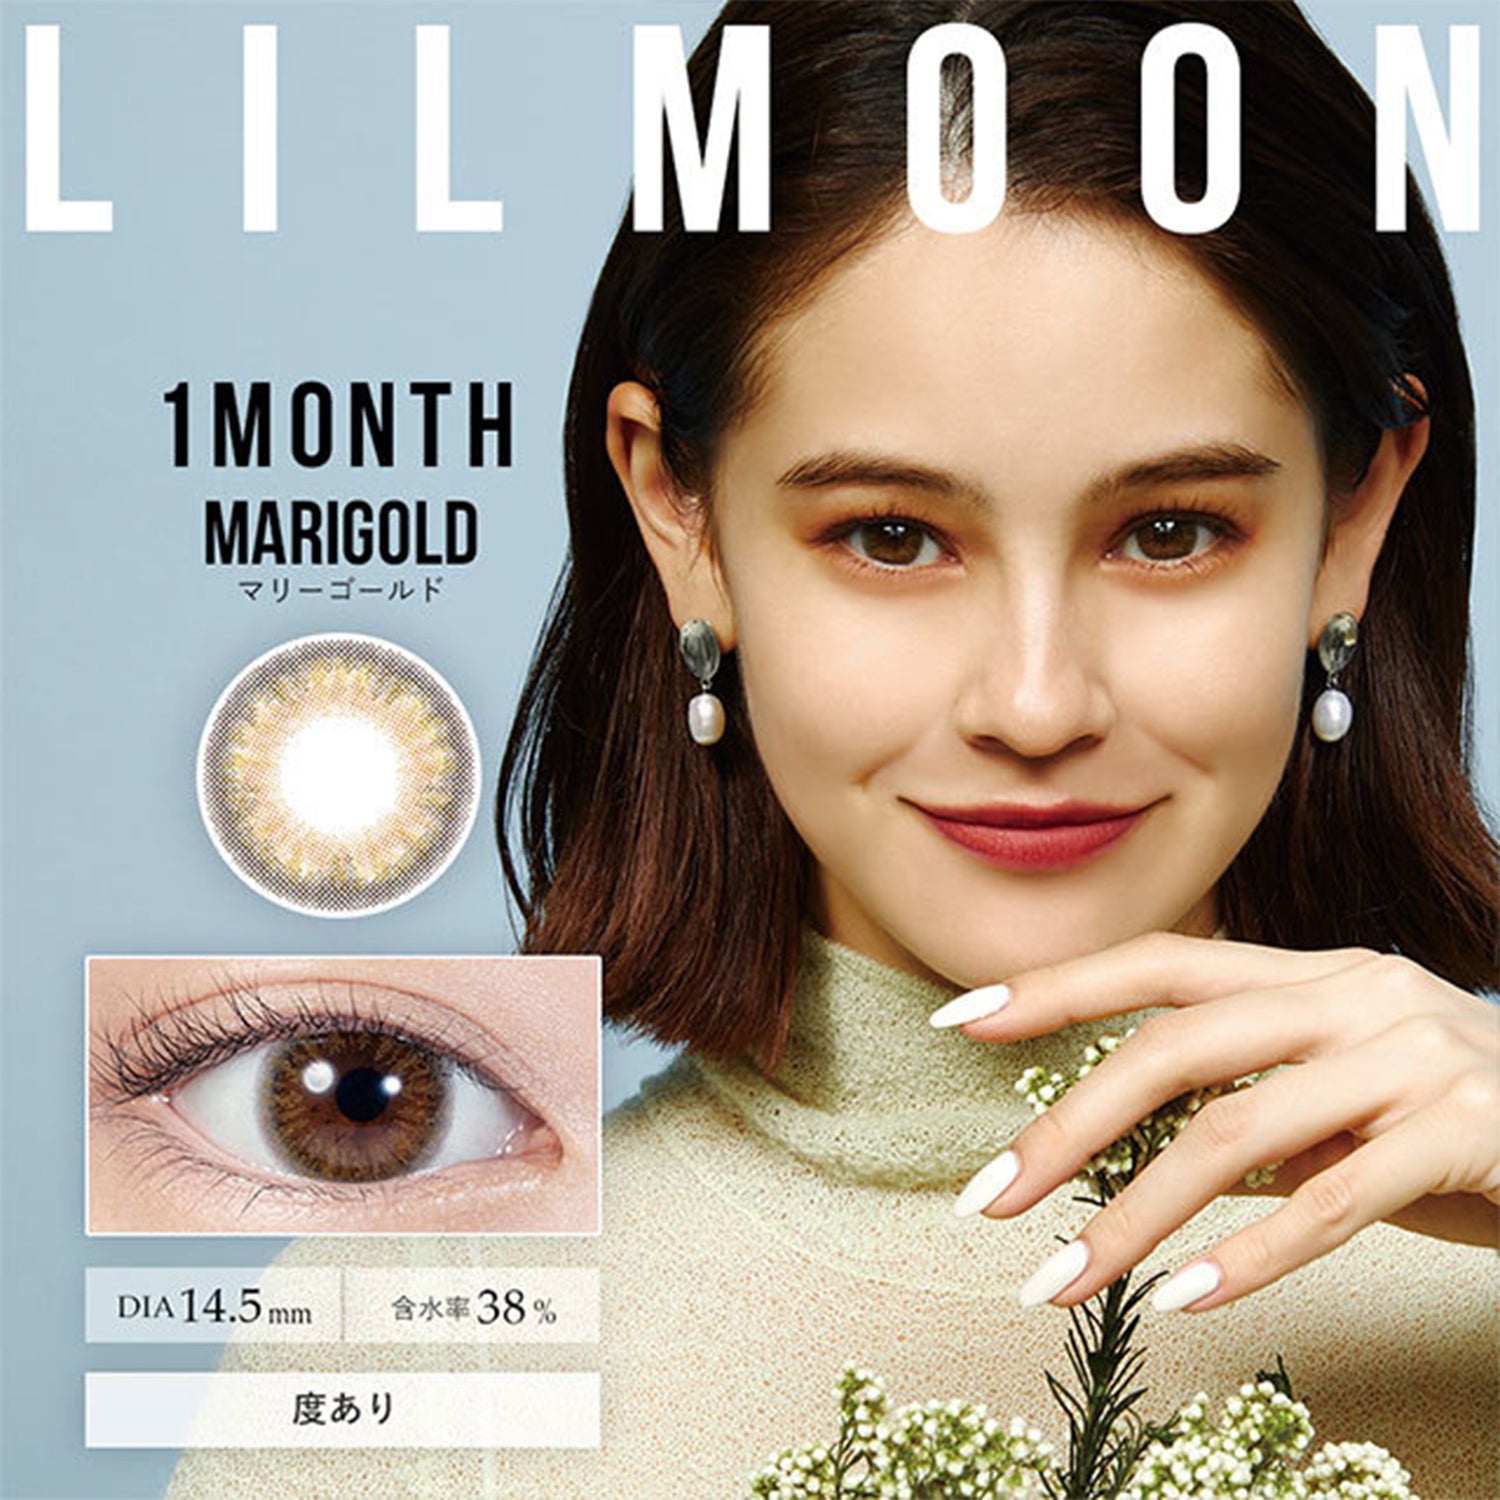 LIL MOON 1Month Contact Lenses-Marigold 1pc